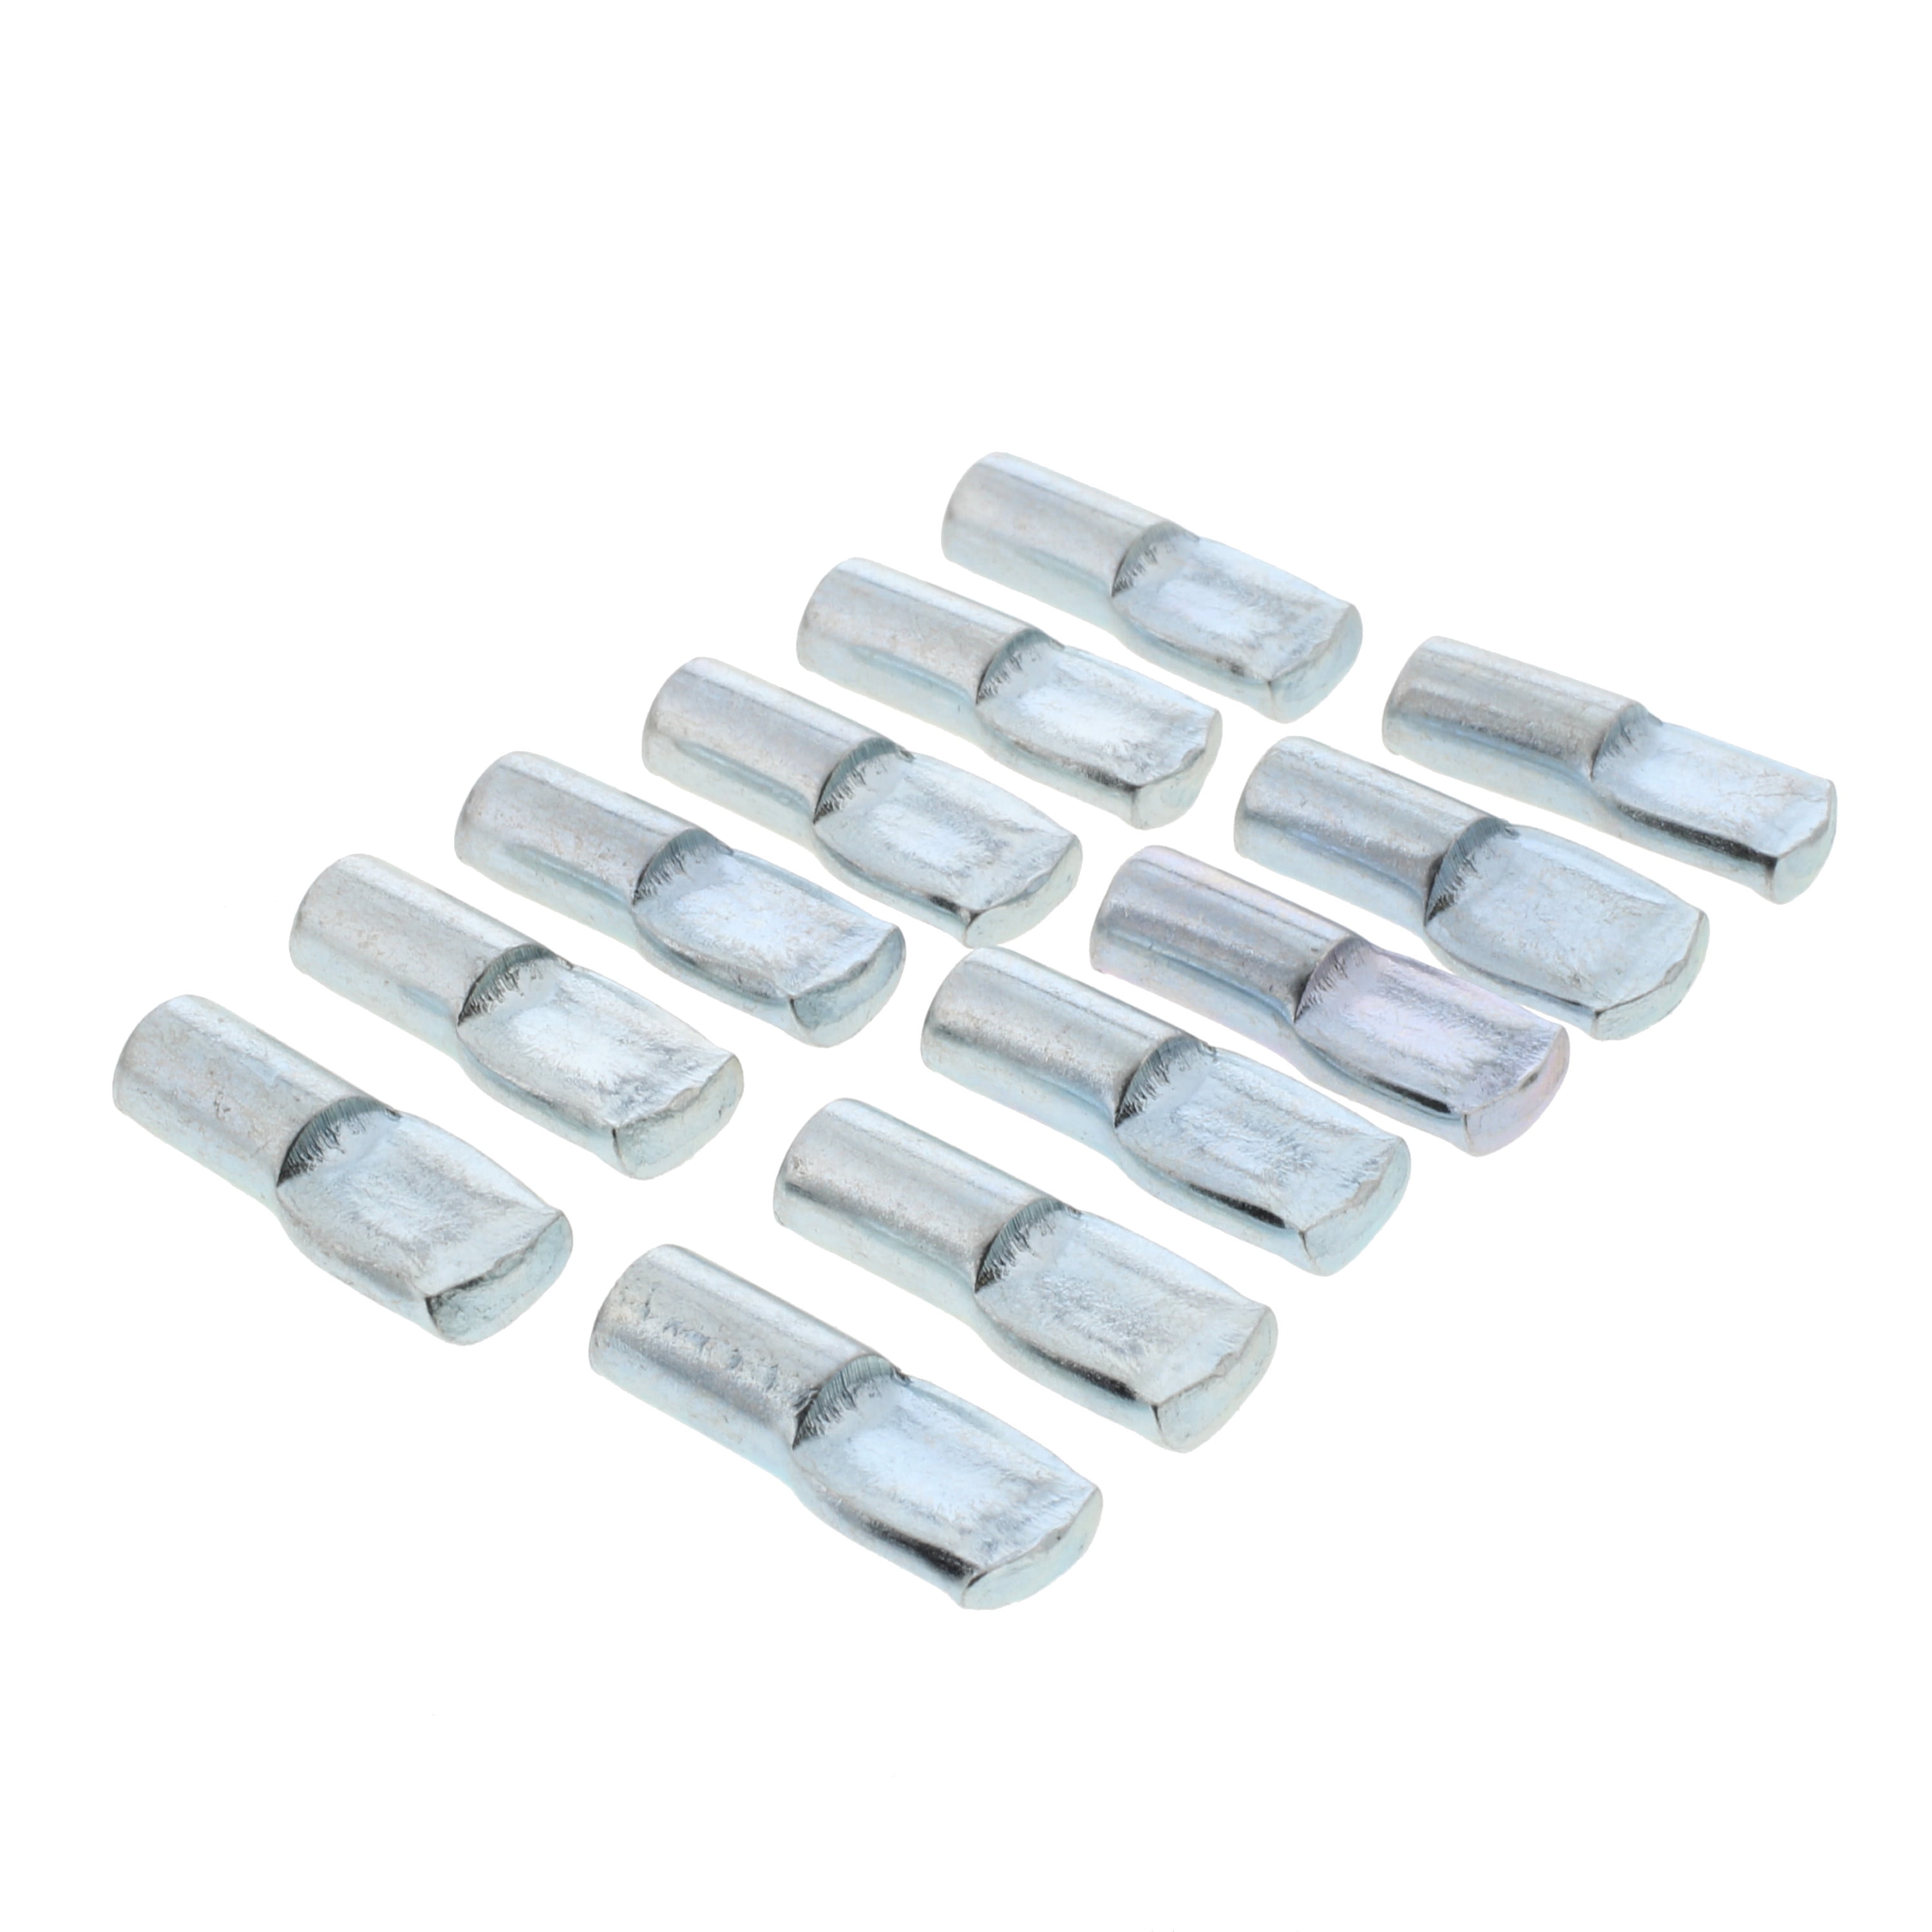 25 mm x 30 mm Pack of 20 Metal Zinc-Coated Clips for Greenhouse 